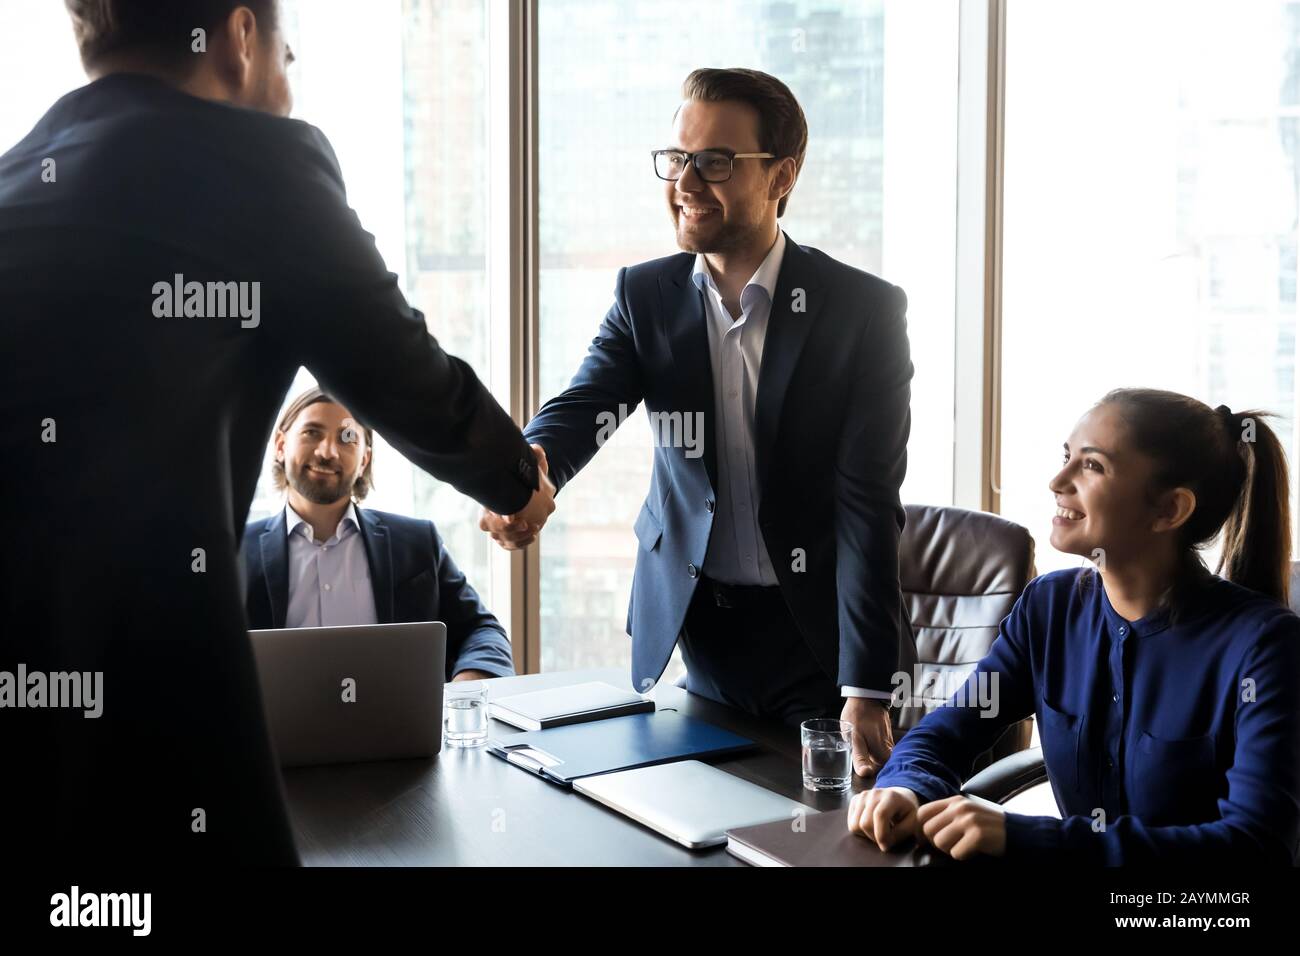 Happy successful businessman in suit shaking hand of applicant. Stock Photo